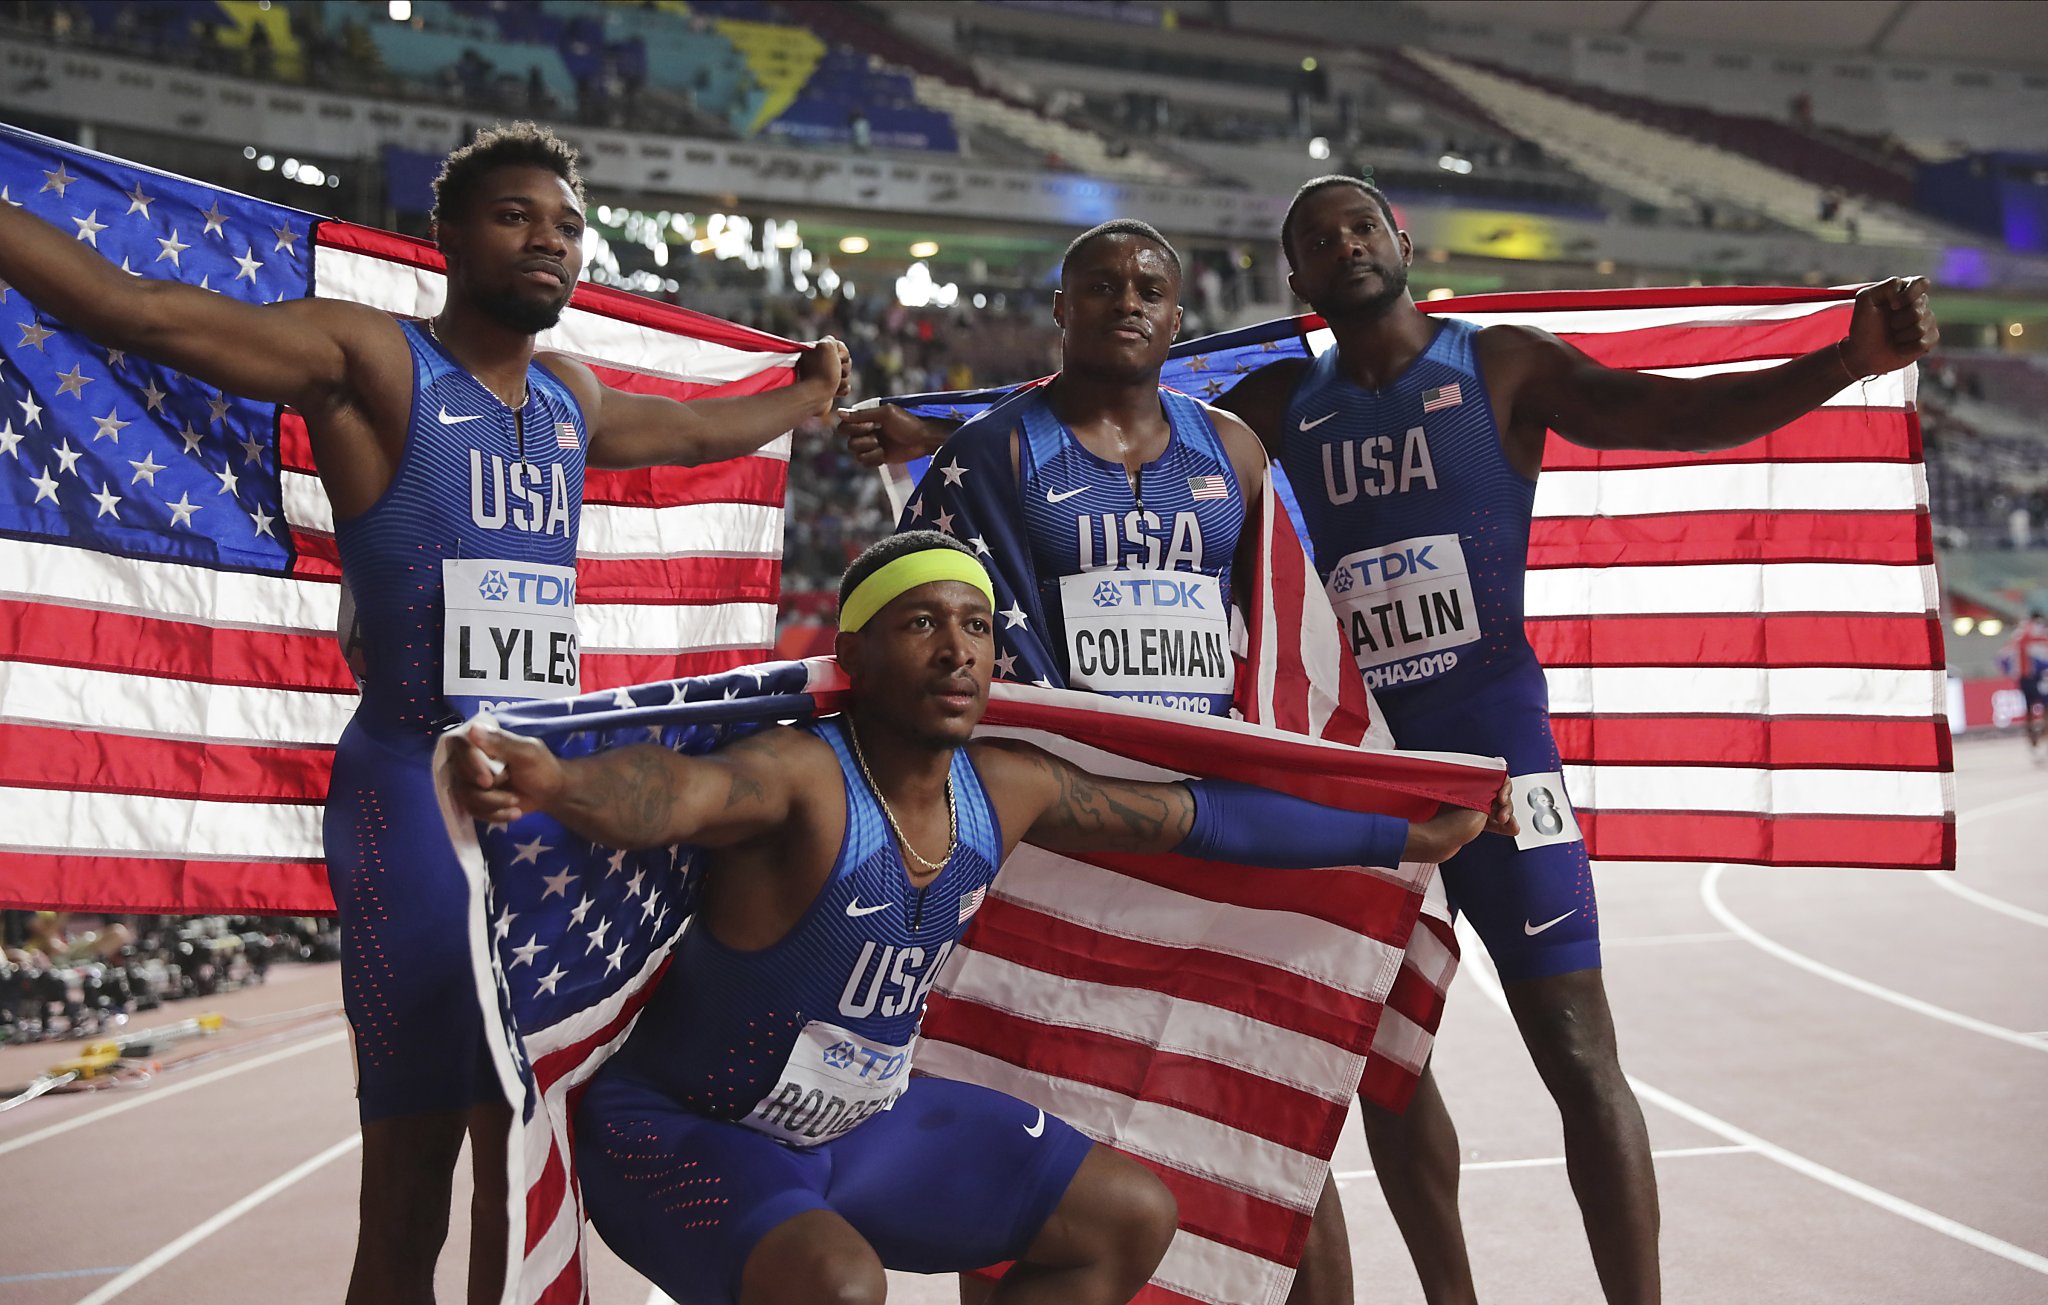 US ends wait for men's 4x100 relay world gold